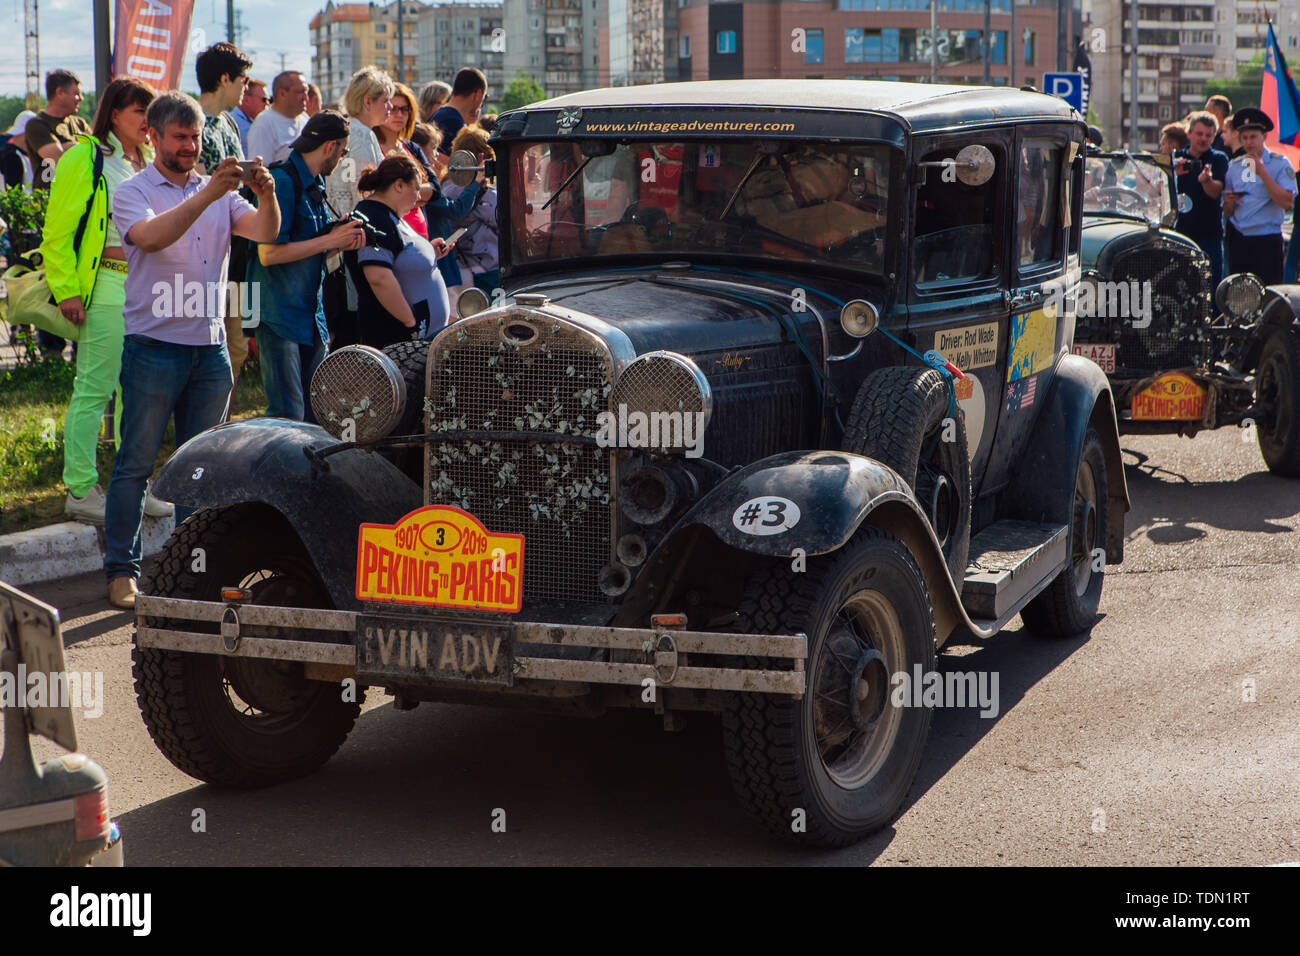 Novokuznetsk, Russia, 13 June 2019: The 7th Peking to Paris Motor Challenge 2019. Cadillac 60 Series 1937 leaving the city and going to next stage of Stock Photo